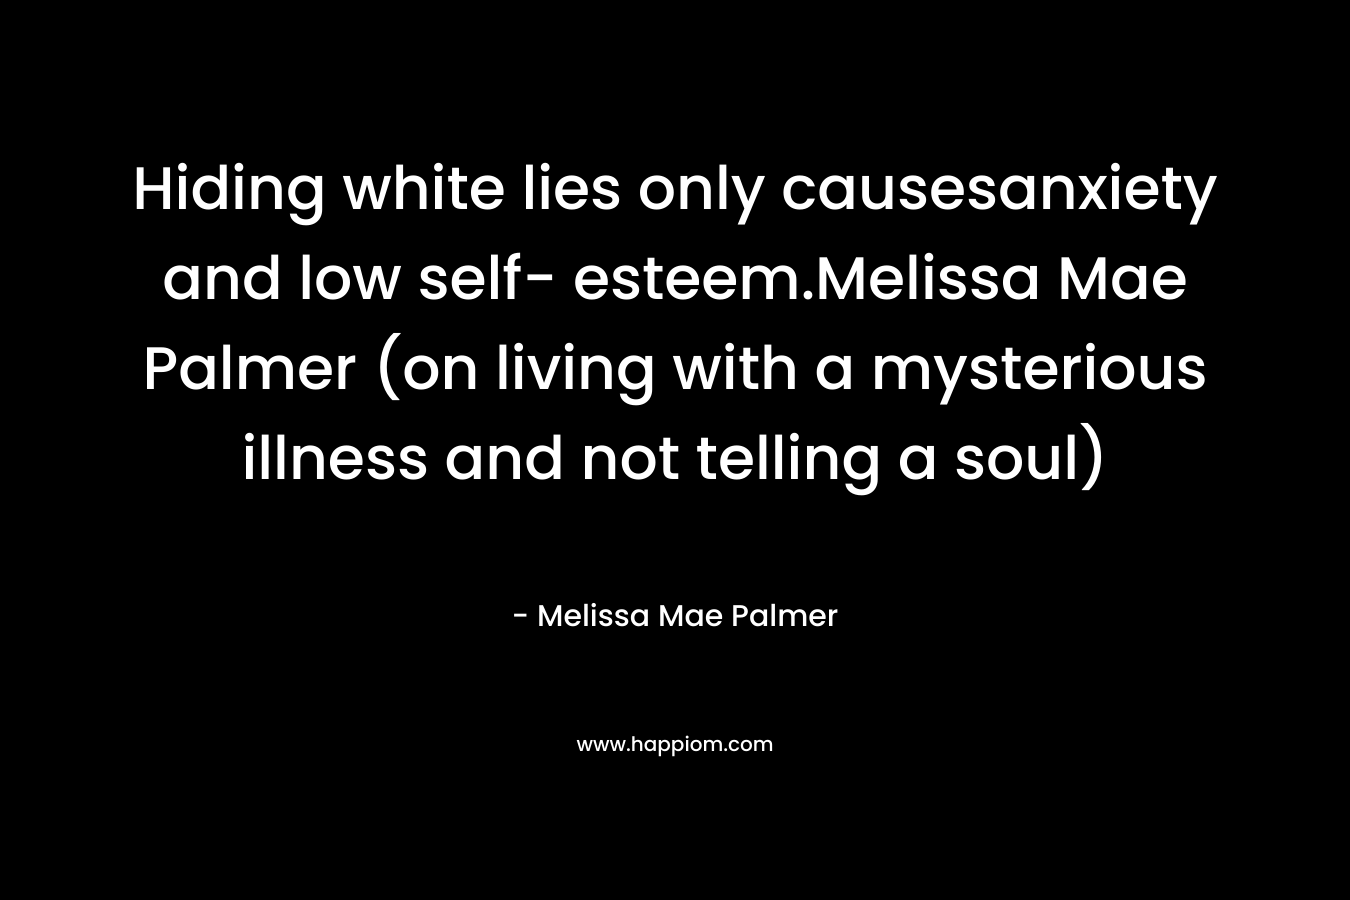 Hiding white lies only causesanxiety and low self- esteem.Melissa Mae Palmer (on living with a mysterious illness and not telling a soul)